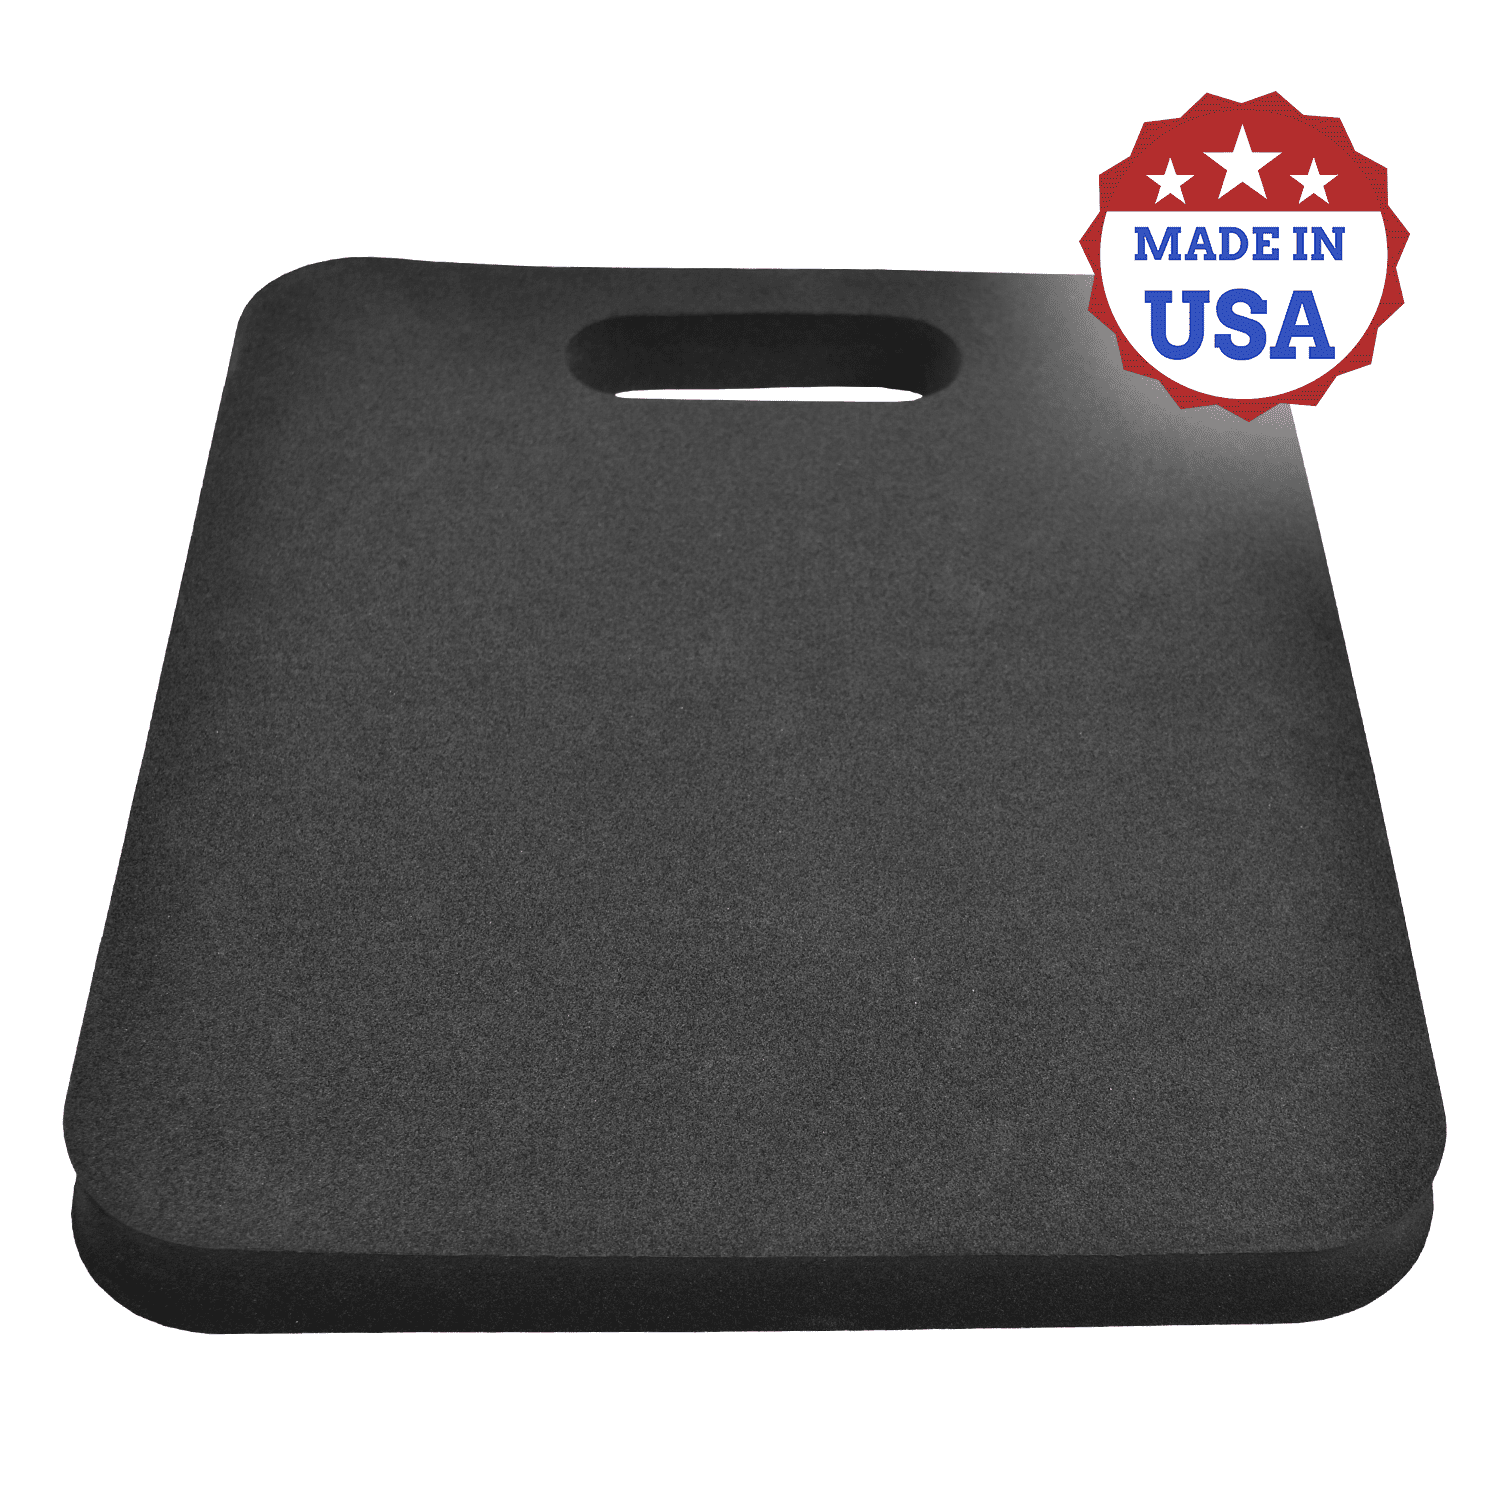 Everlasting Comfort FSA HSA Approved Memory Foam Seat Cushion - Stadium  Seat Cushion, Bleacher Cushion for Indoor, Outdoor Use - Extra Wide, Thick